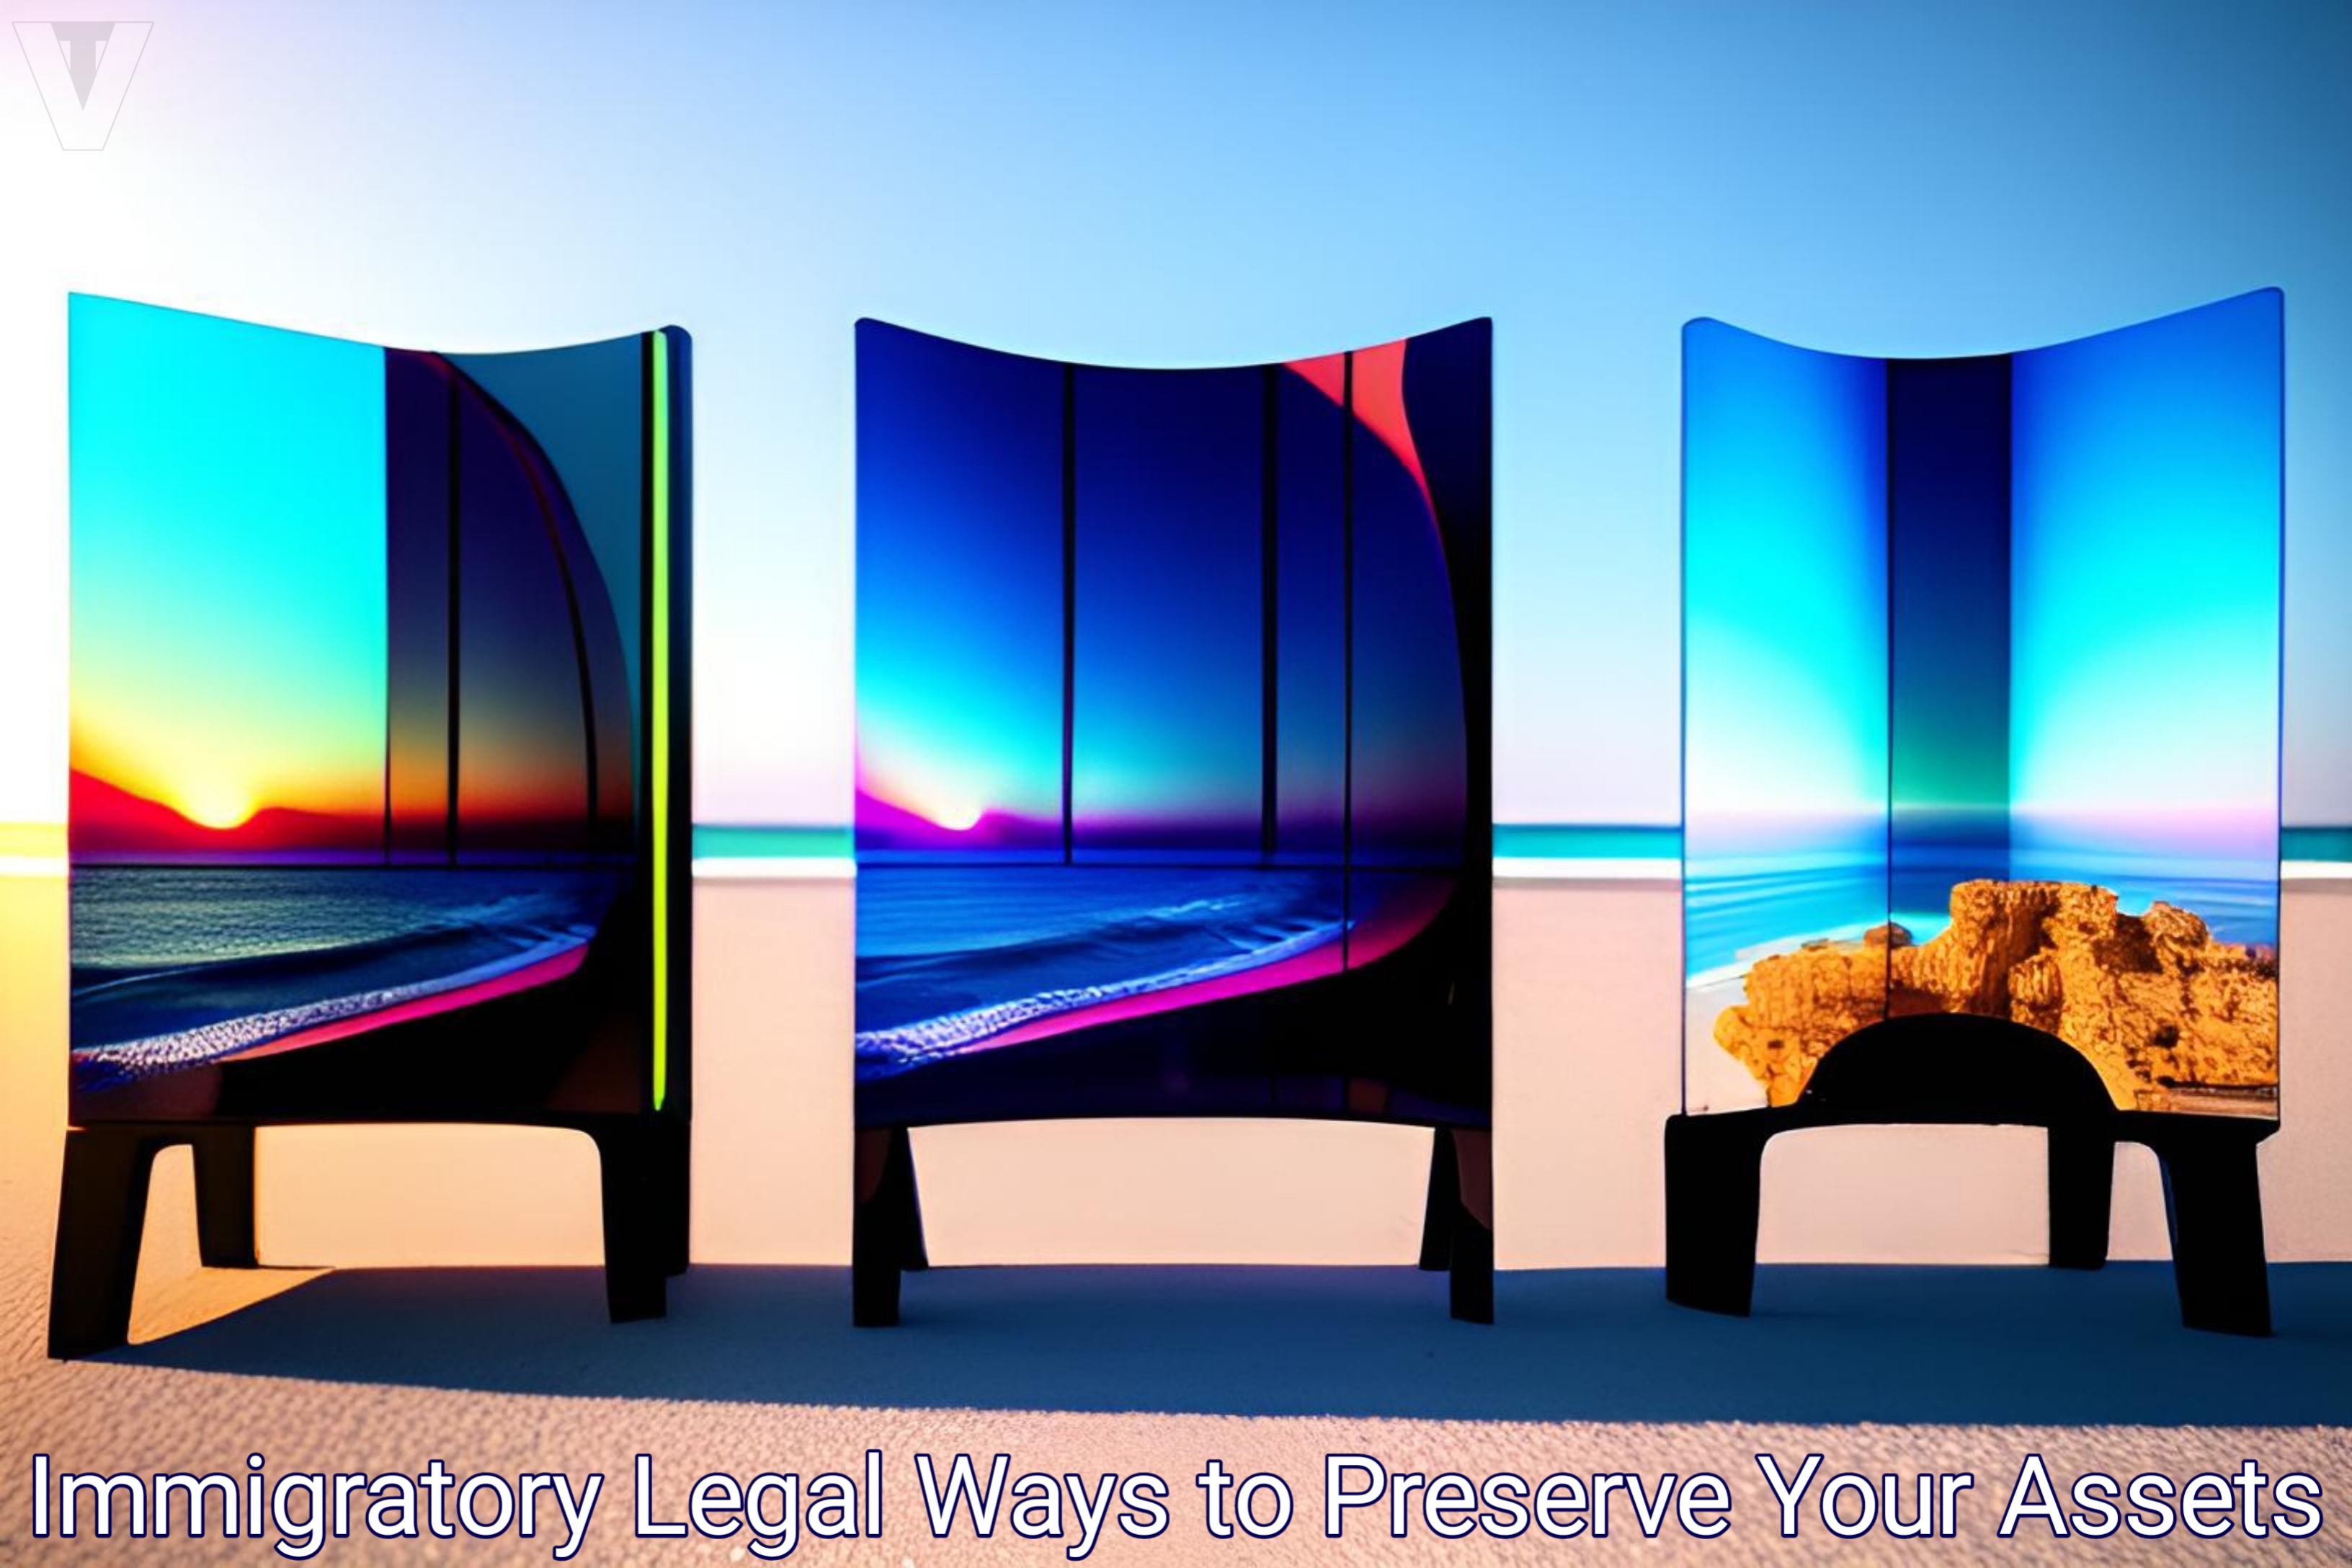 Legal Ways to Preserve Your Assets as an Immigrant | VitalyTennant.com 2